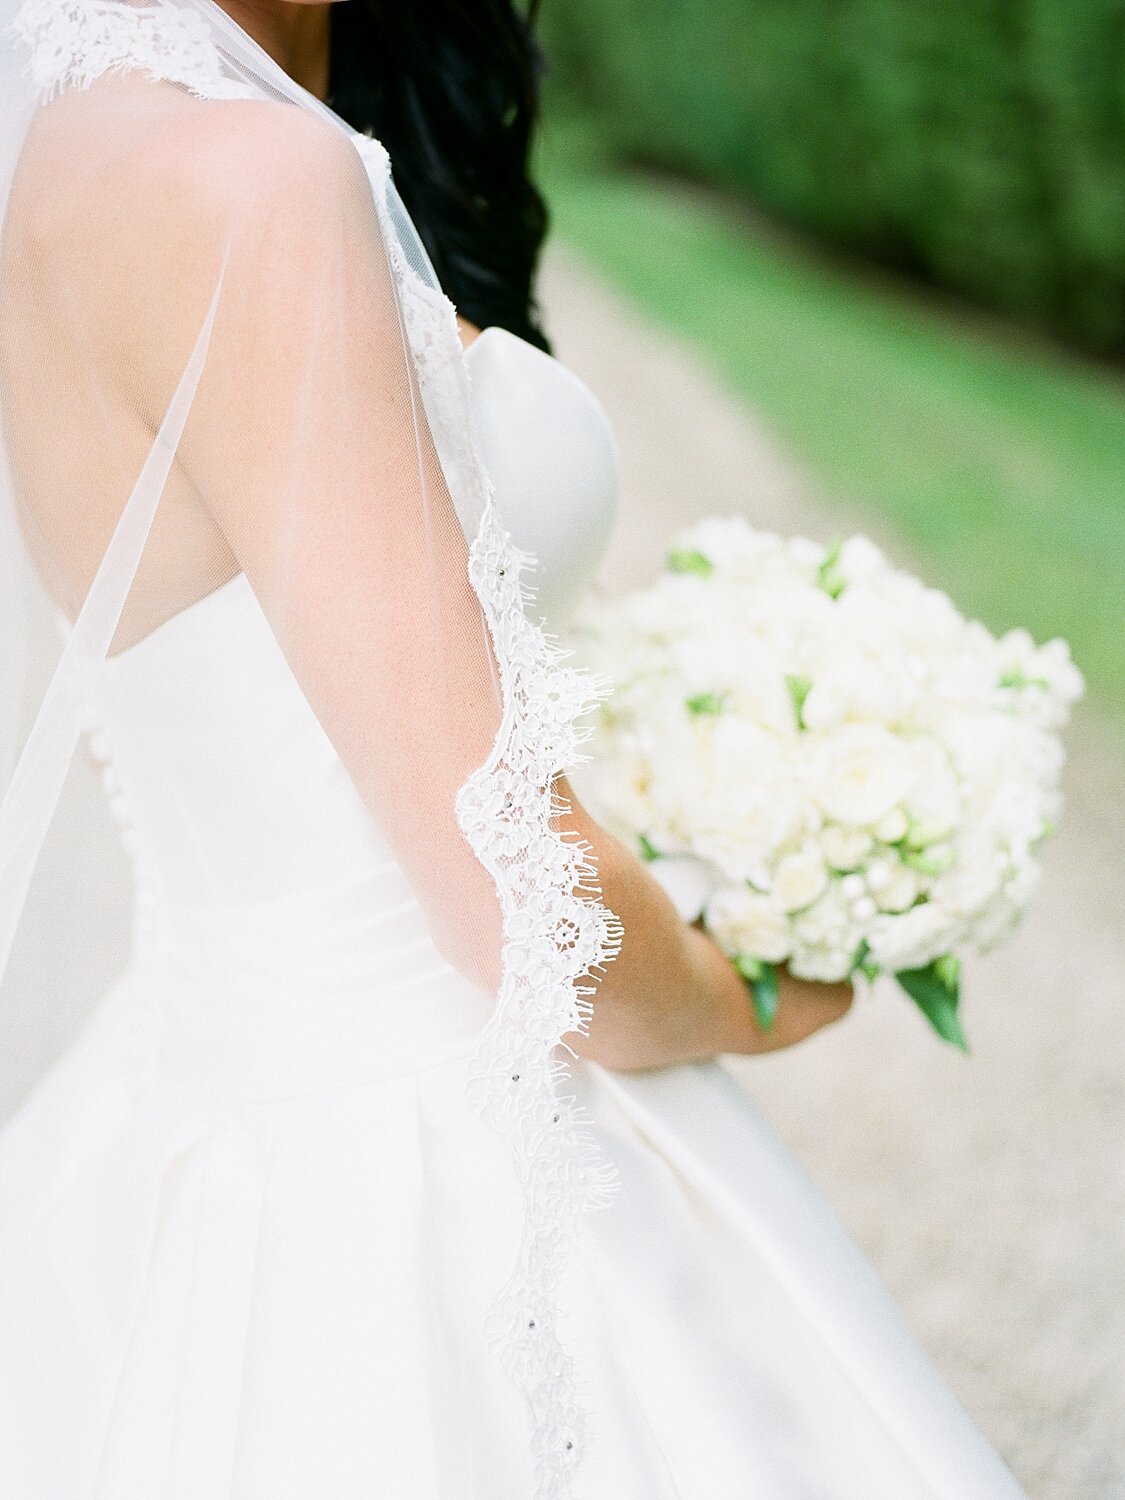 all-white wedding bouquet photographed by Asher Gardner Photography